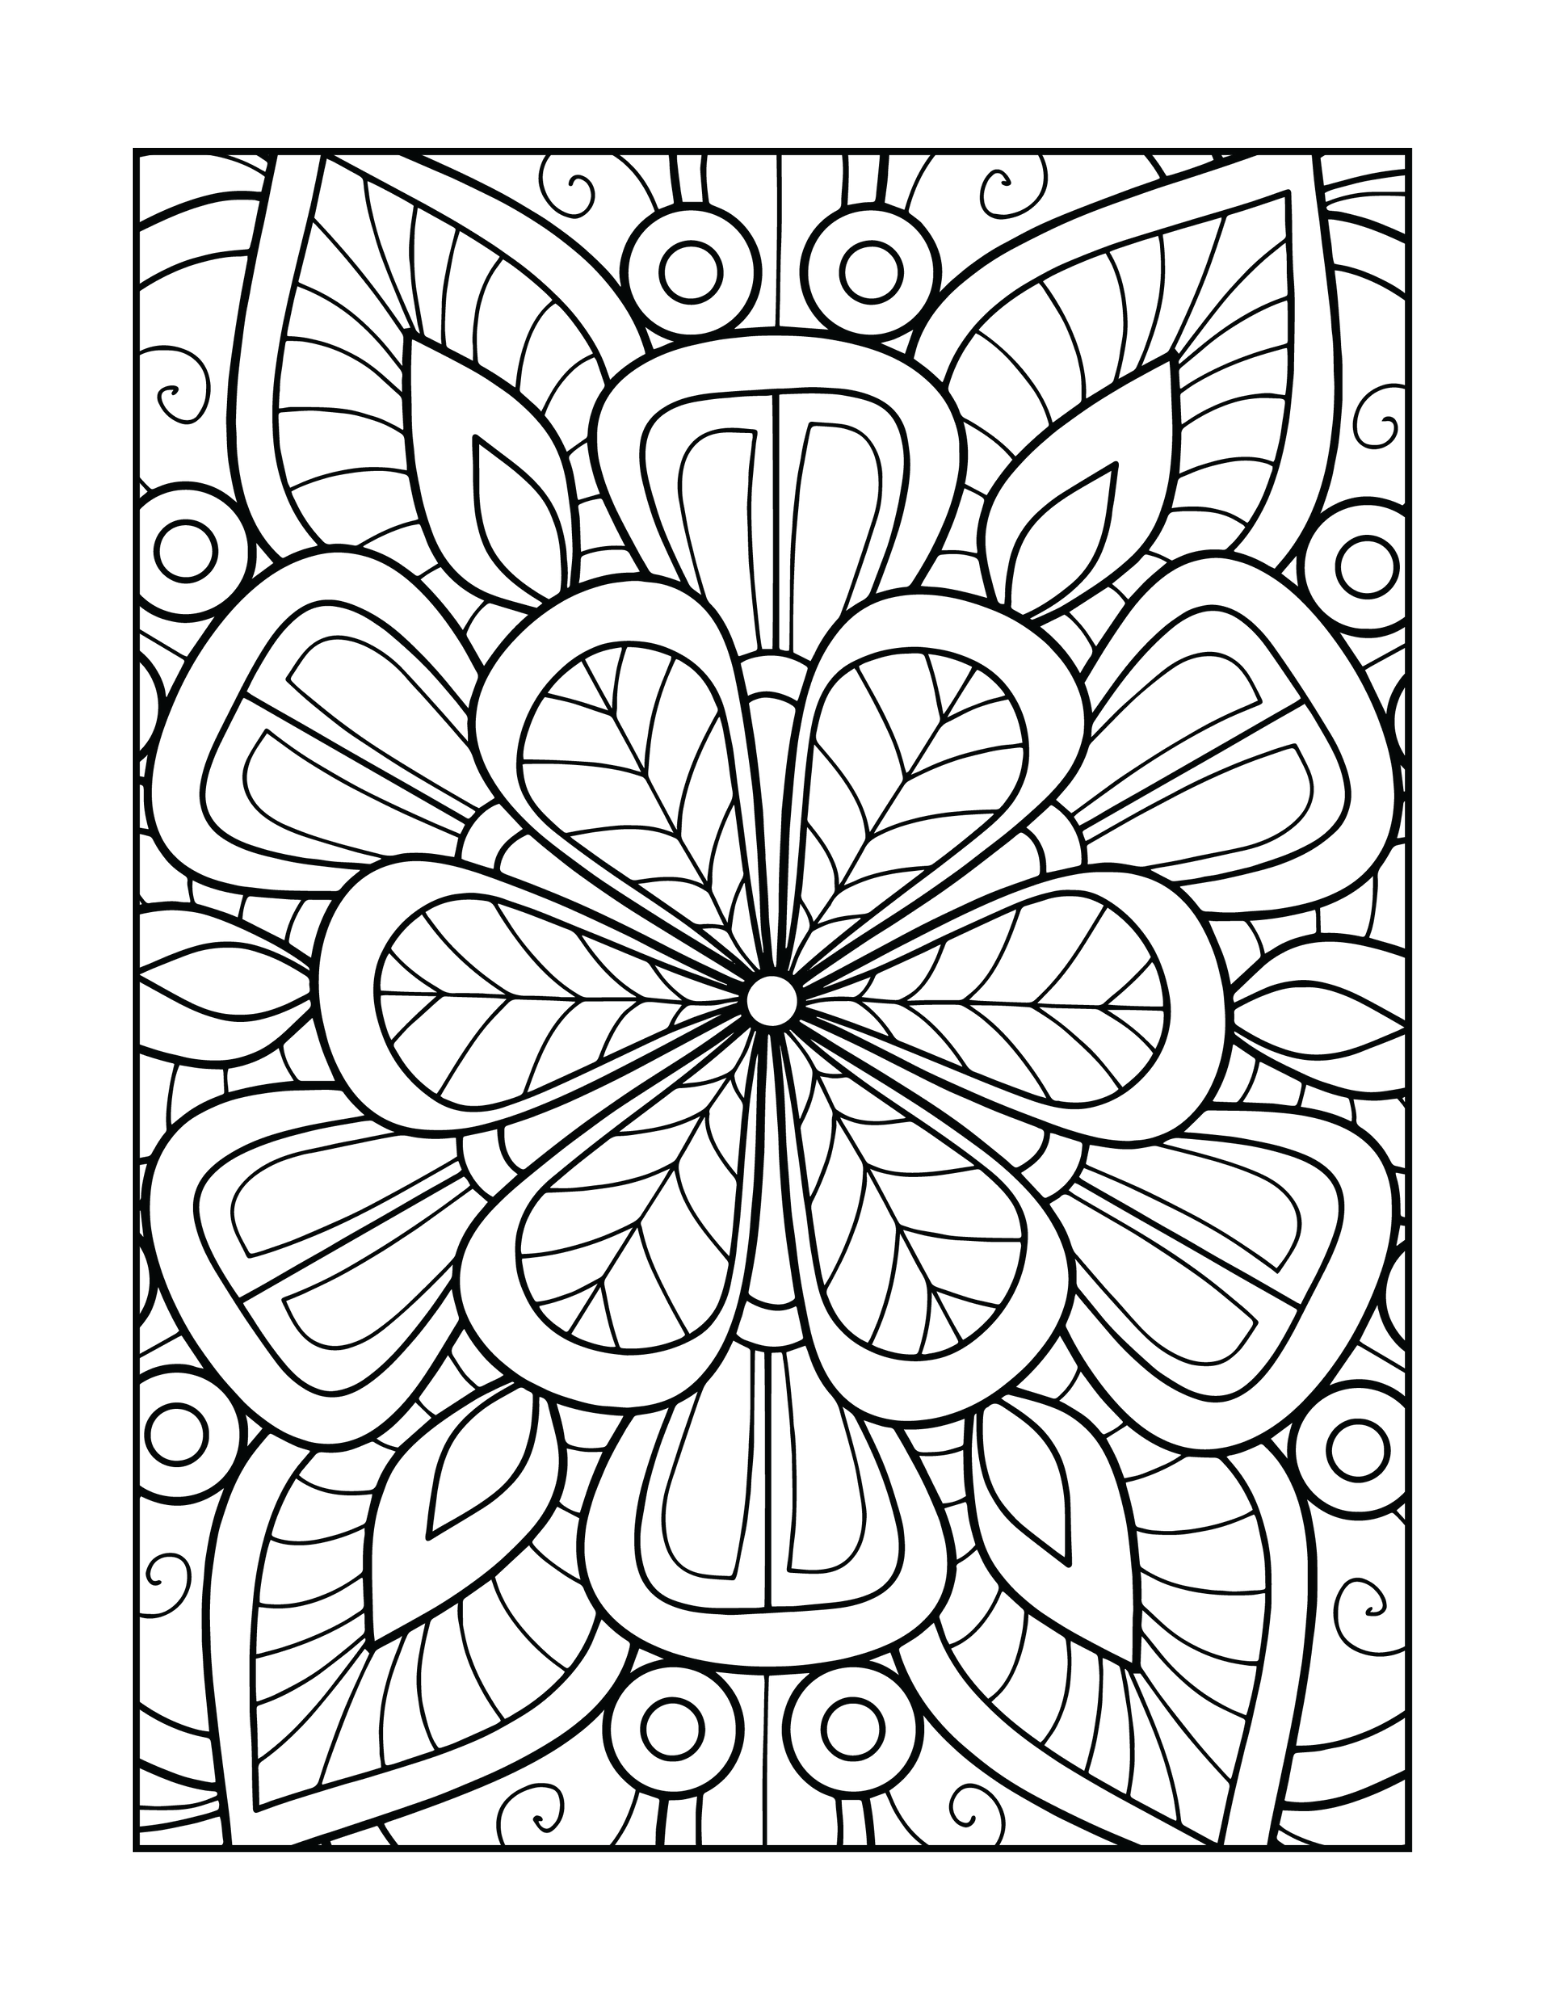 Adult Coloring book with stress relieving mandala patterns - shop.nil-tech